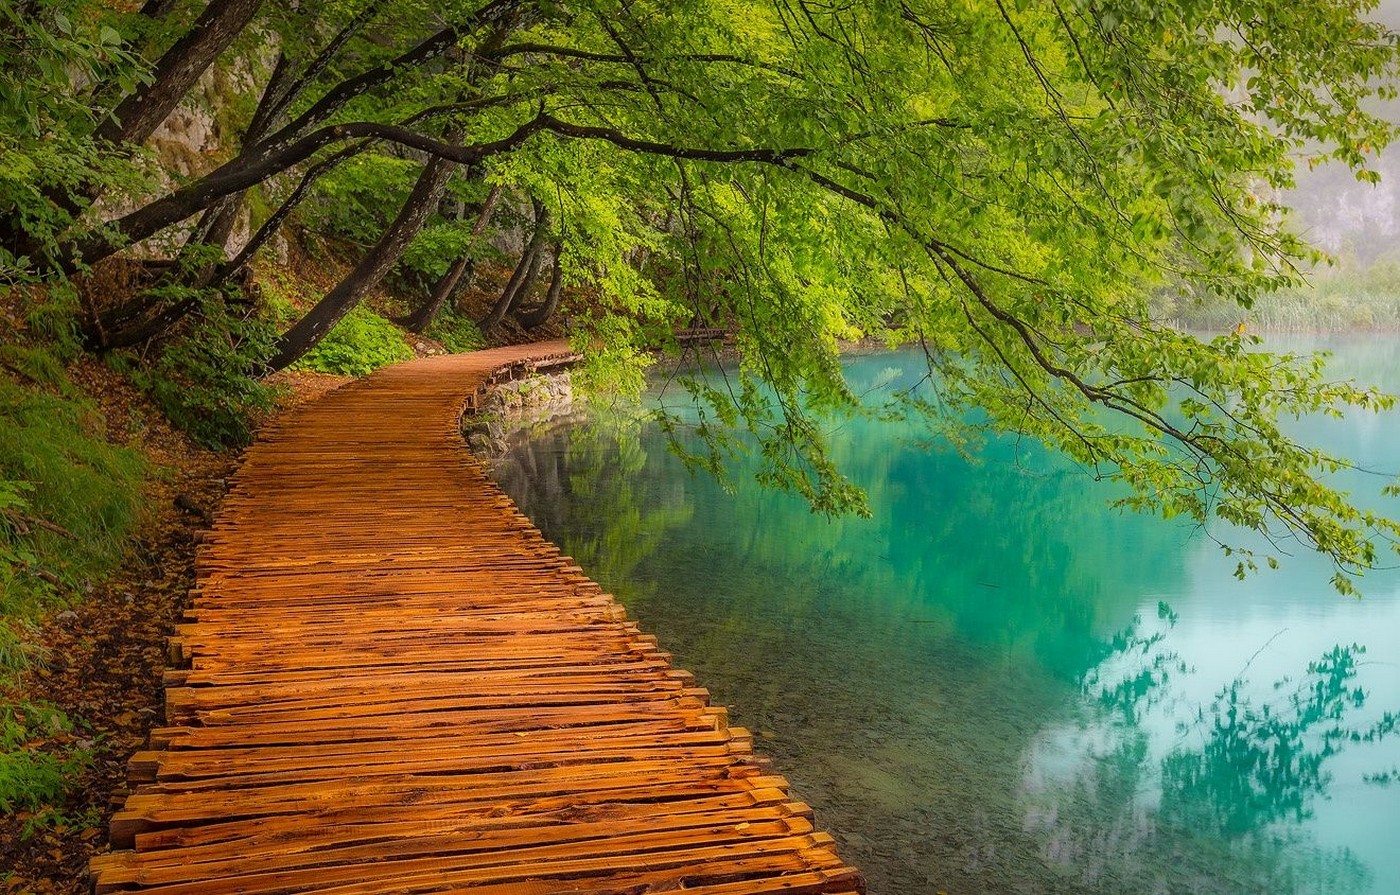 landscape, Photography, Nature, Walkway, Lake, Trees, Path, Turquoise, Water, Plitvice National Park, Croatia Wallpaper